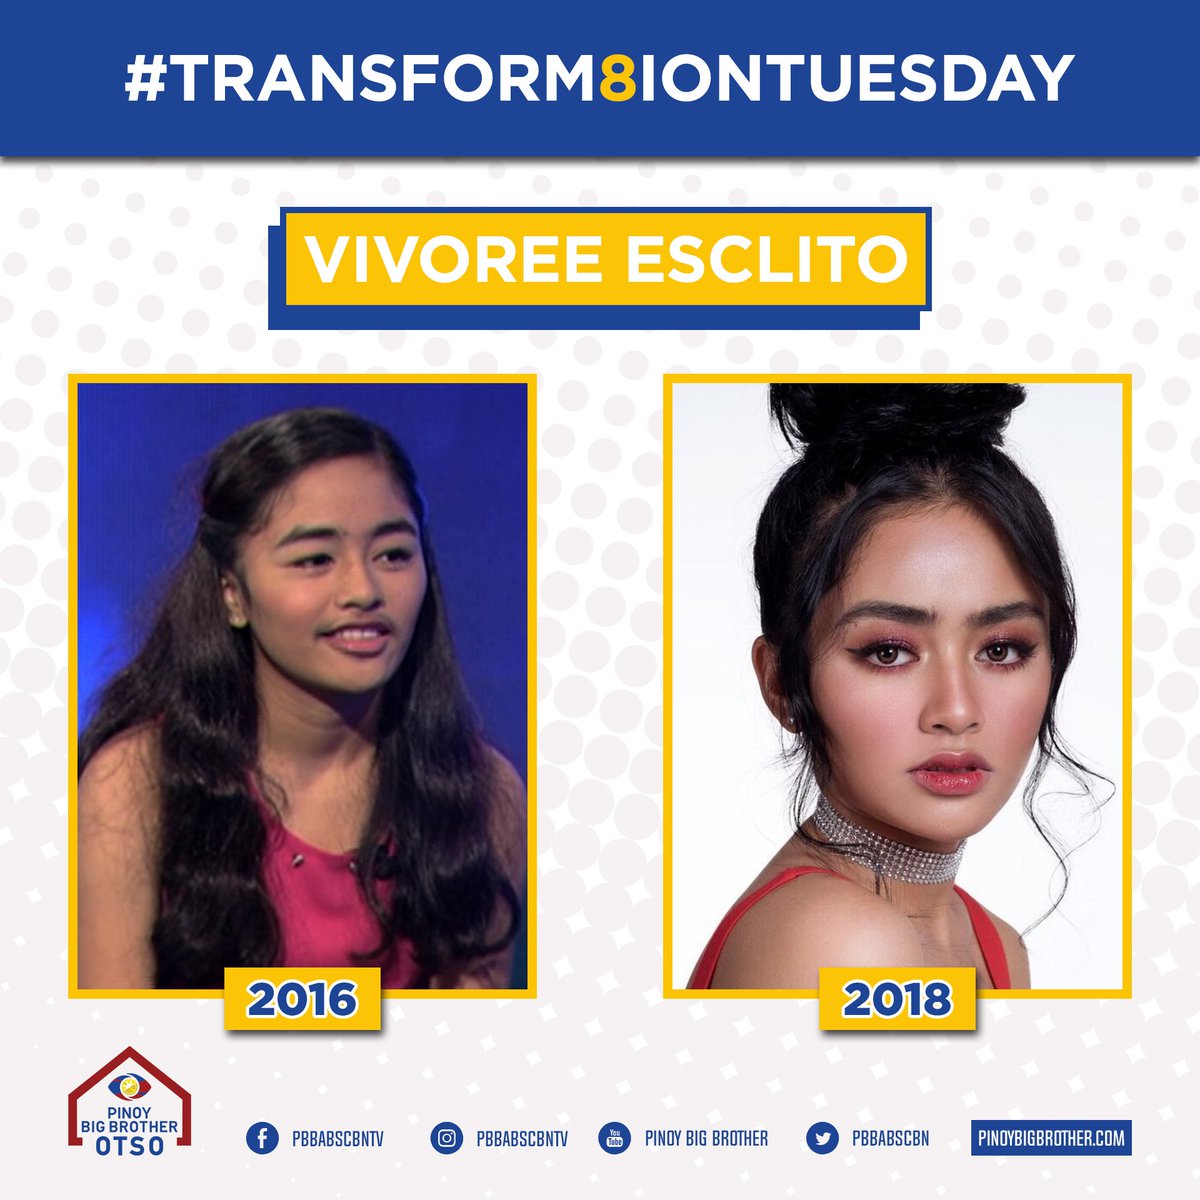 #Transforma8ionTuesday: From a simple 'go-getter girl' to a stylish teen star. ✨ Way to go, Vivoree!

#PinoyBigF8ter